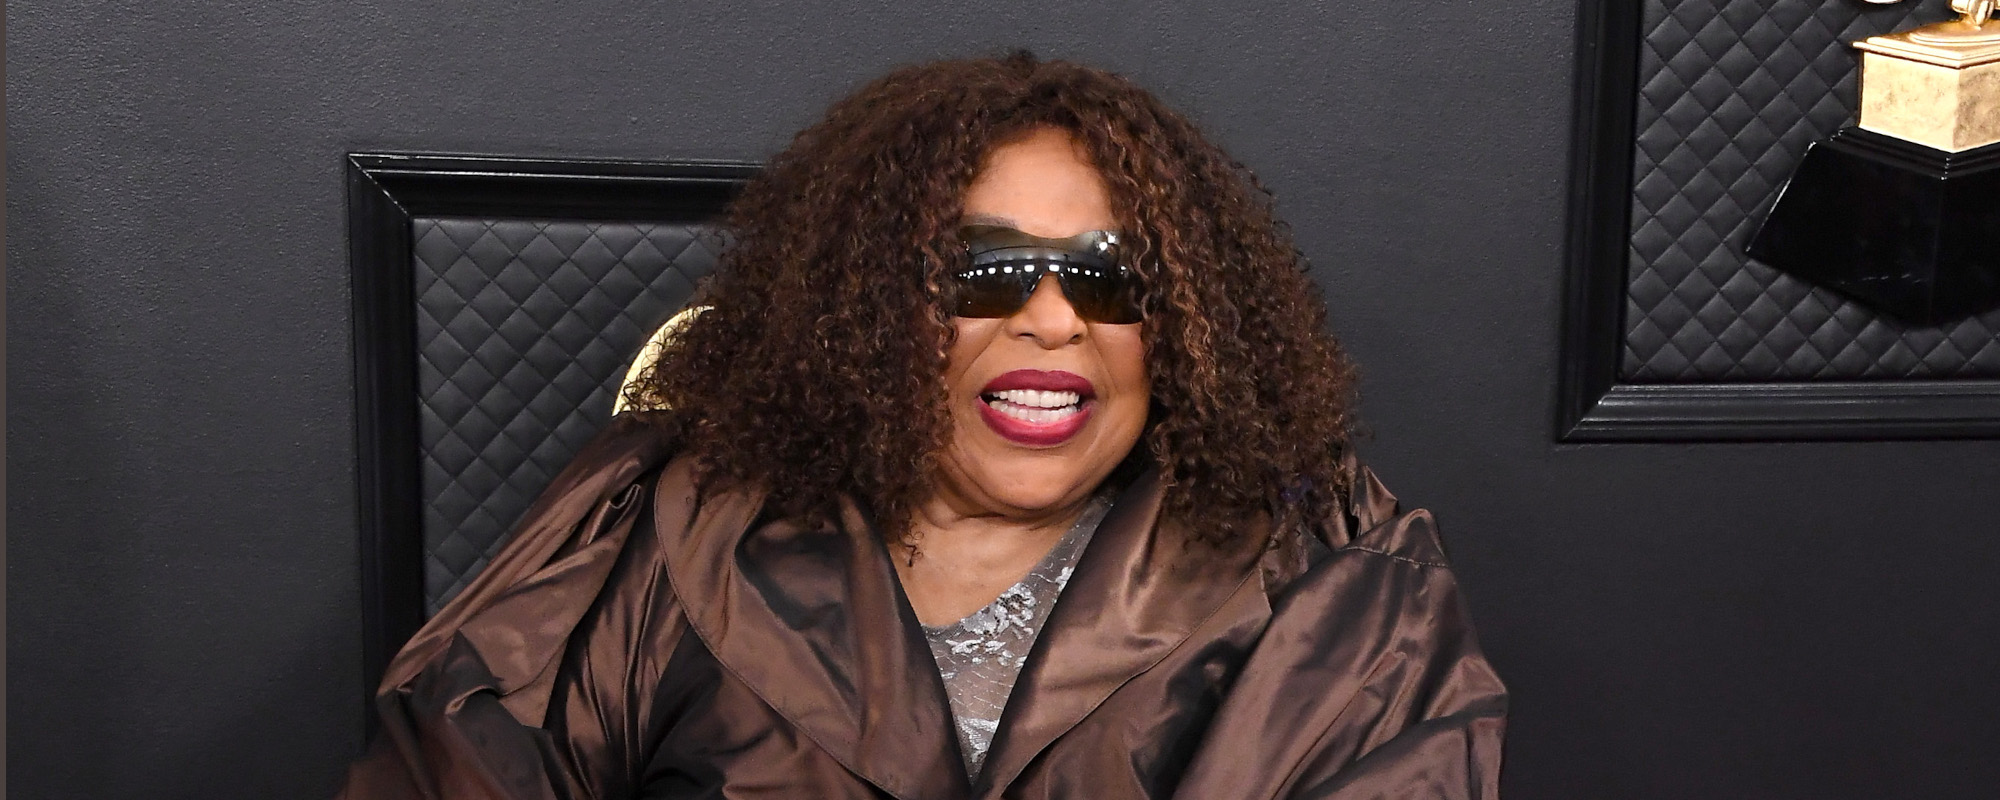 Roberta Flack Reveals ALS Diagnosis, Now ‘Impossible To Sing’